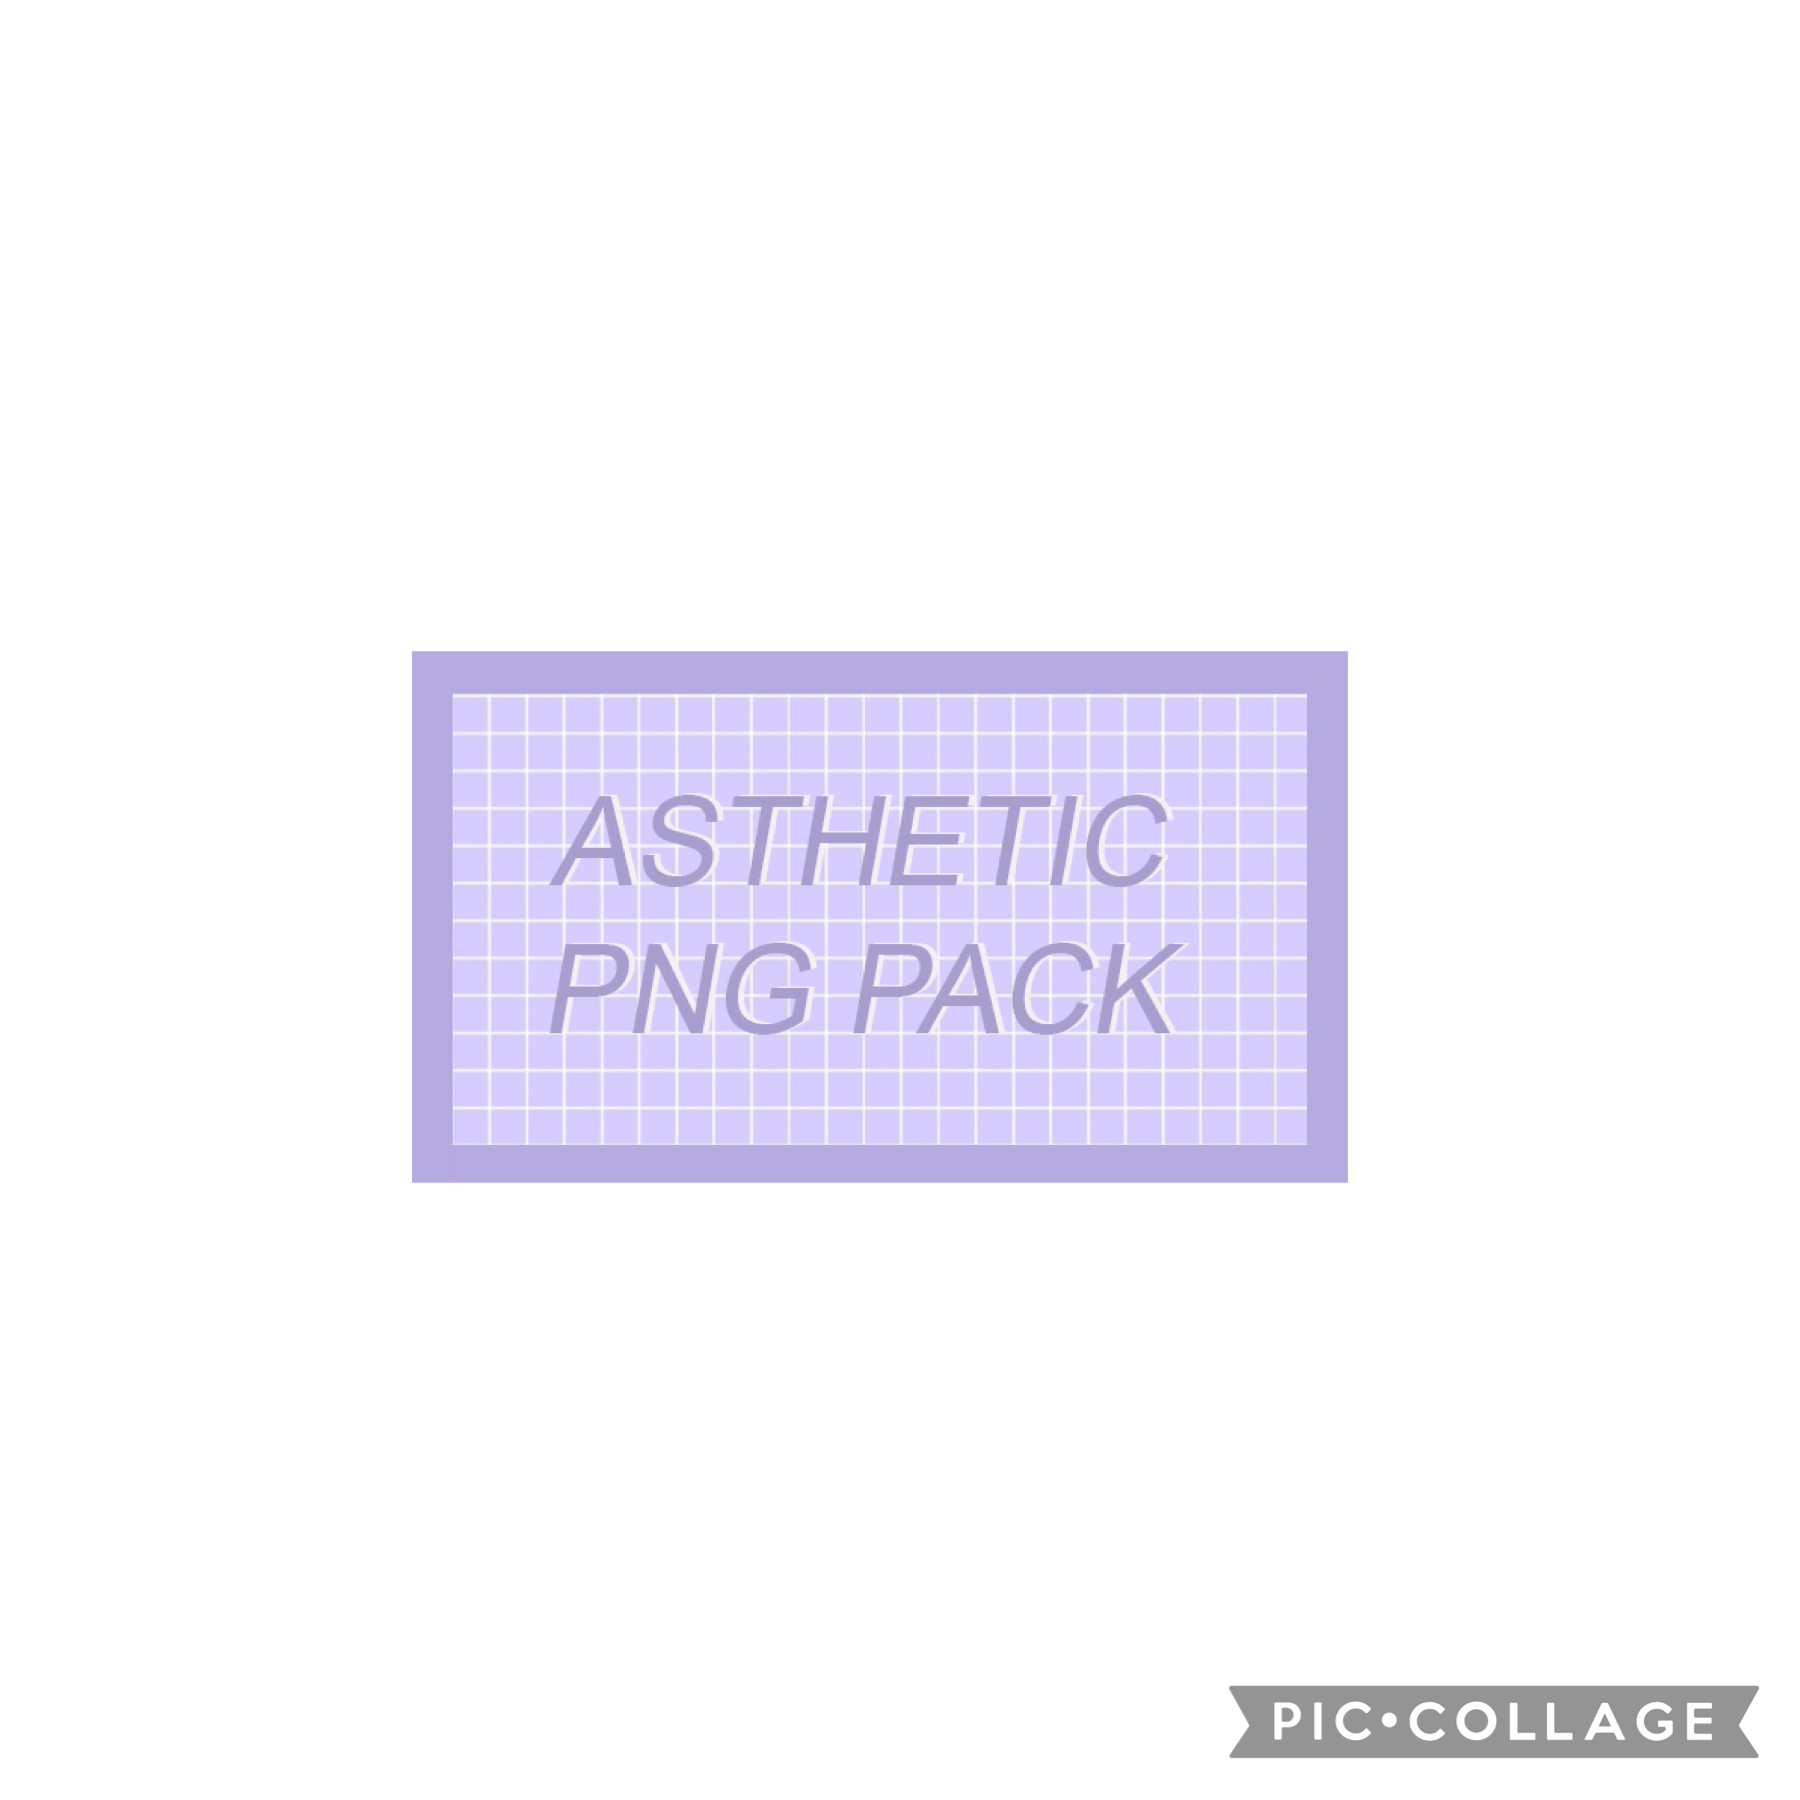 🛼click🛼
PNG pack 